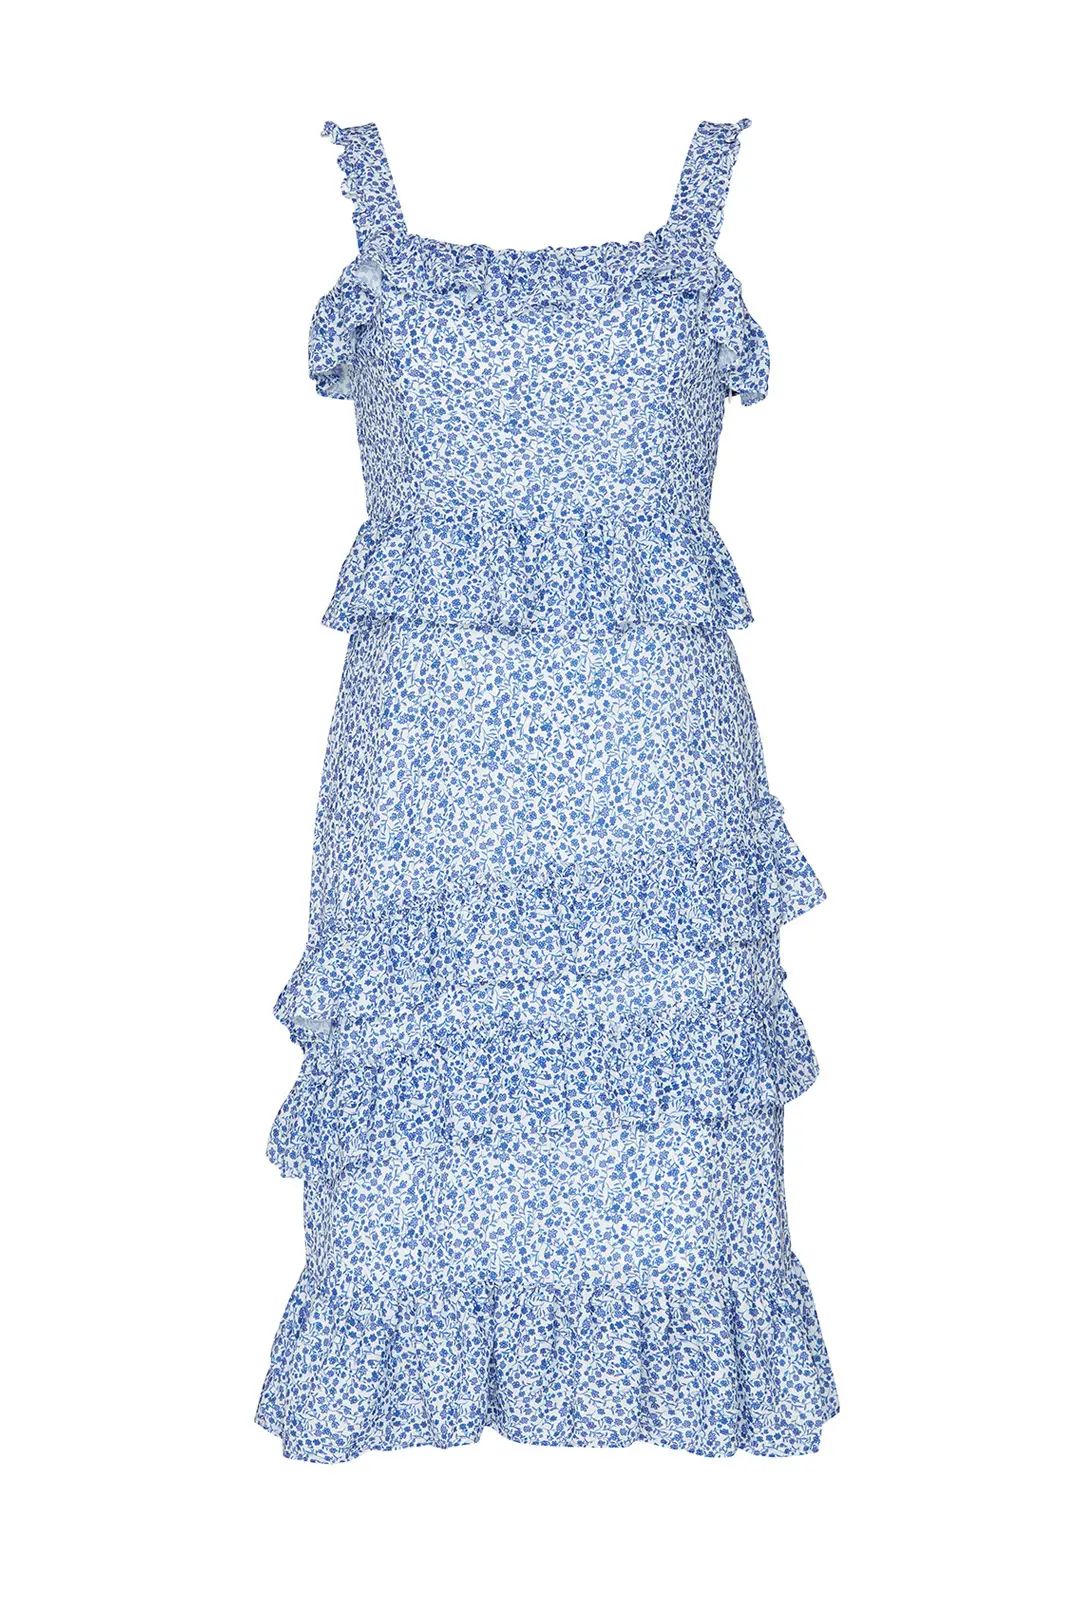 Alexia Admor Blue Ivory Floral Dress | Rent The Runway